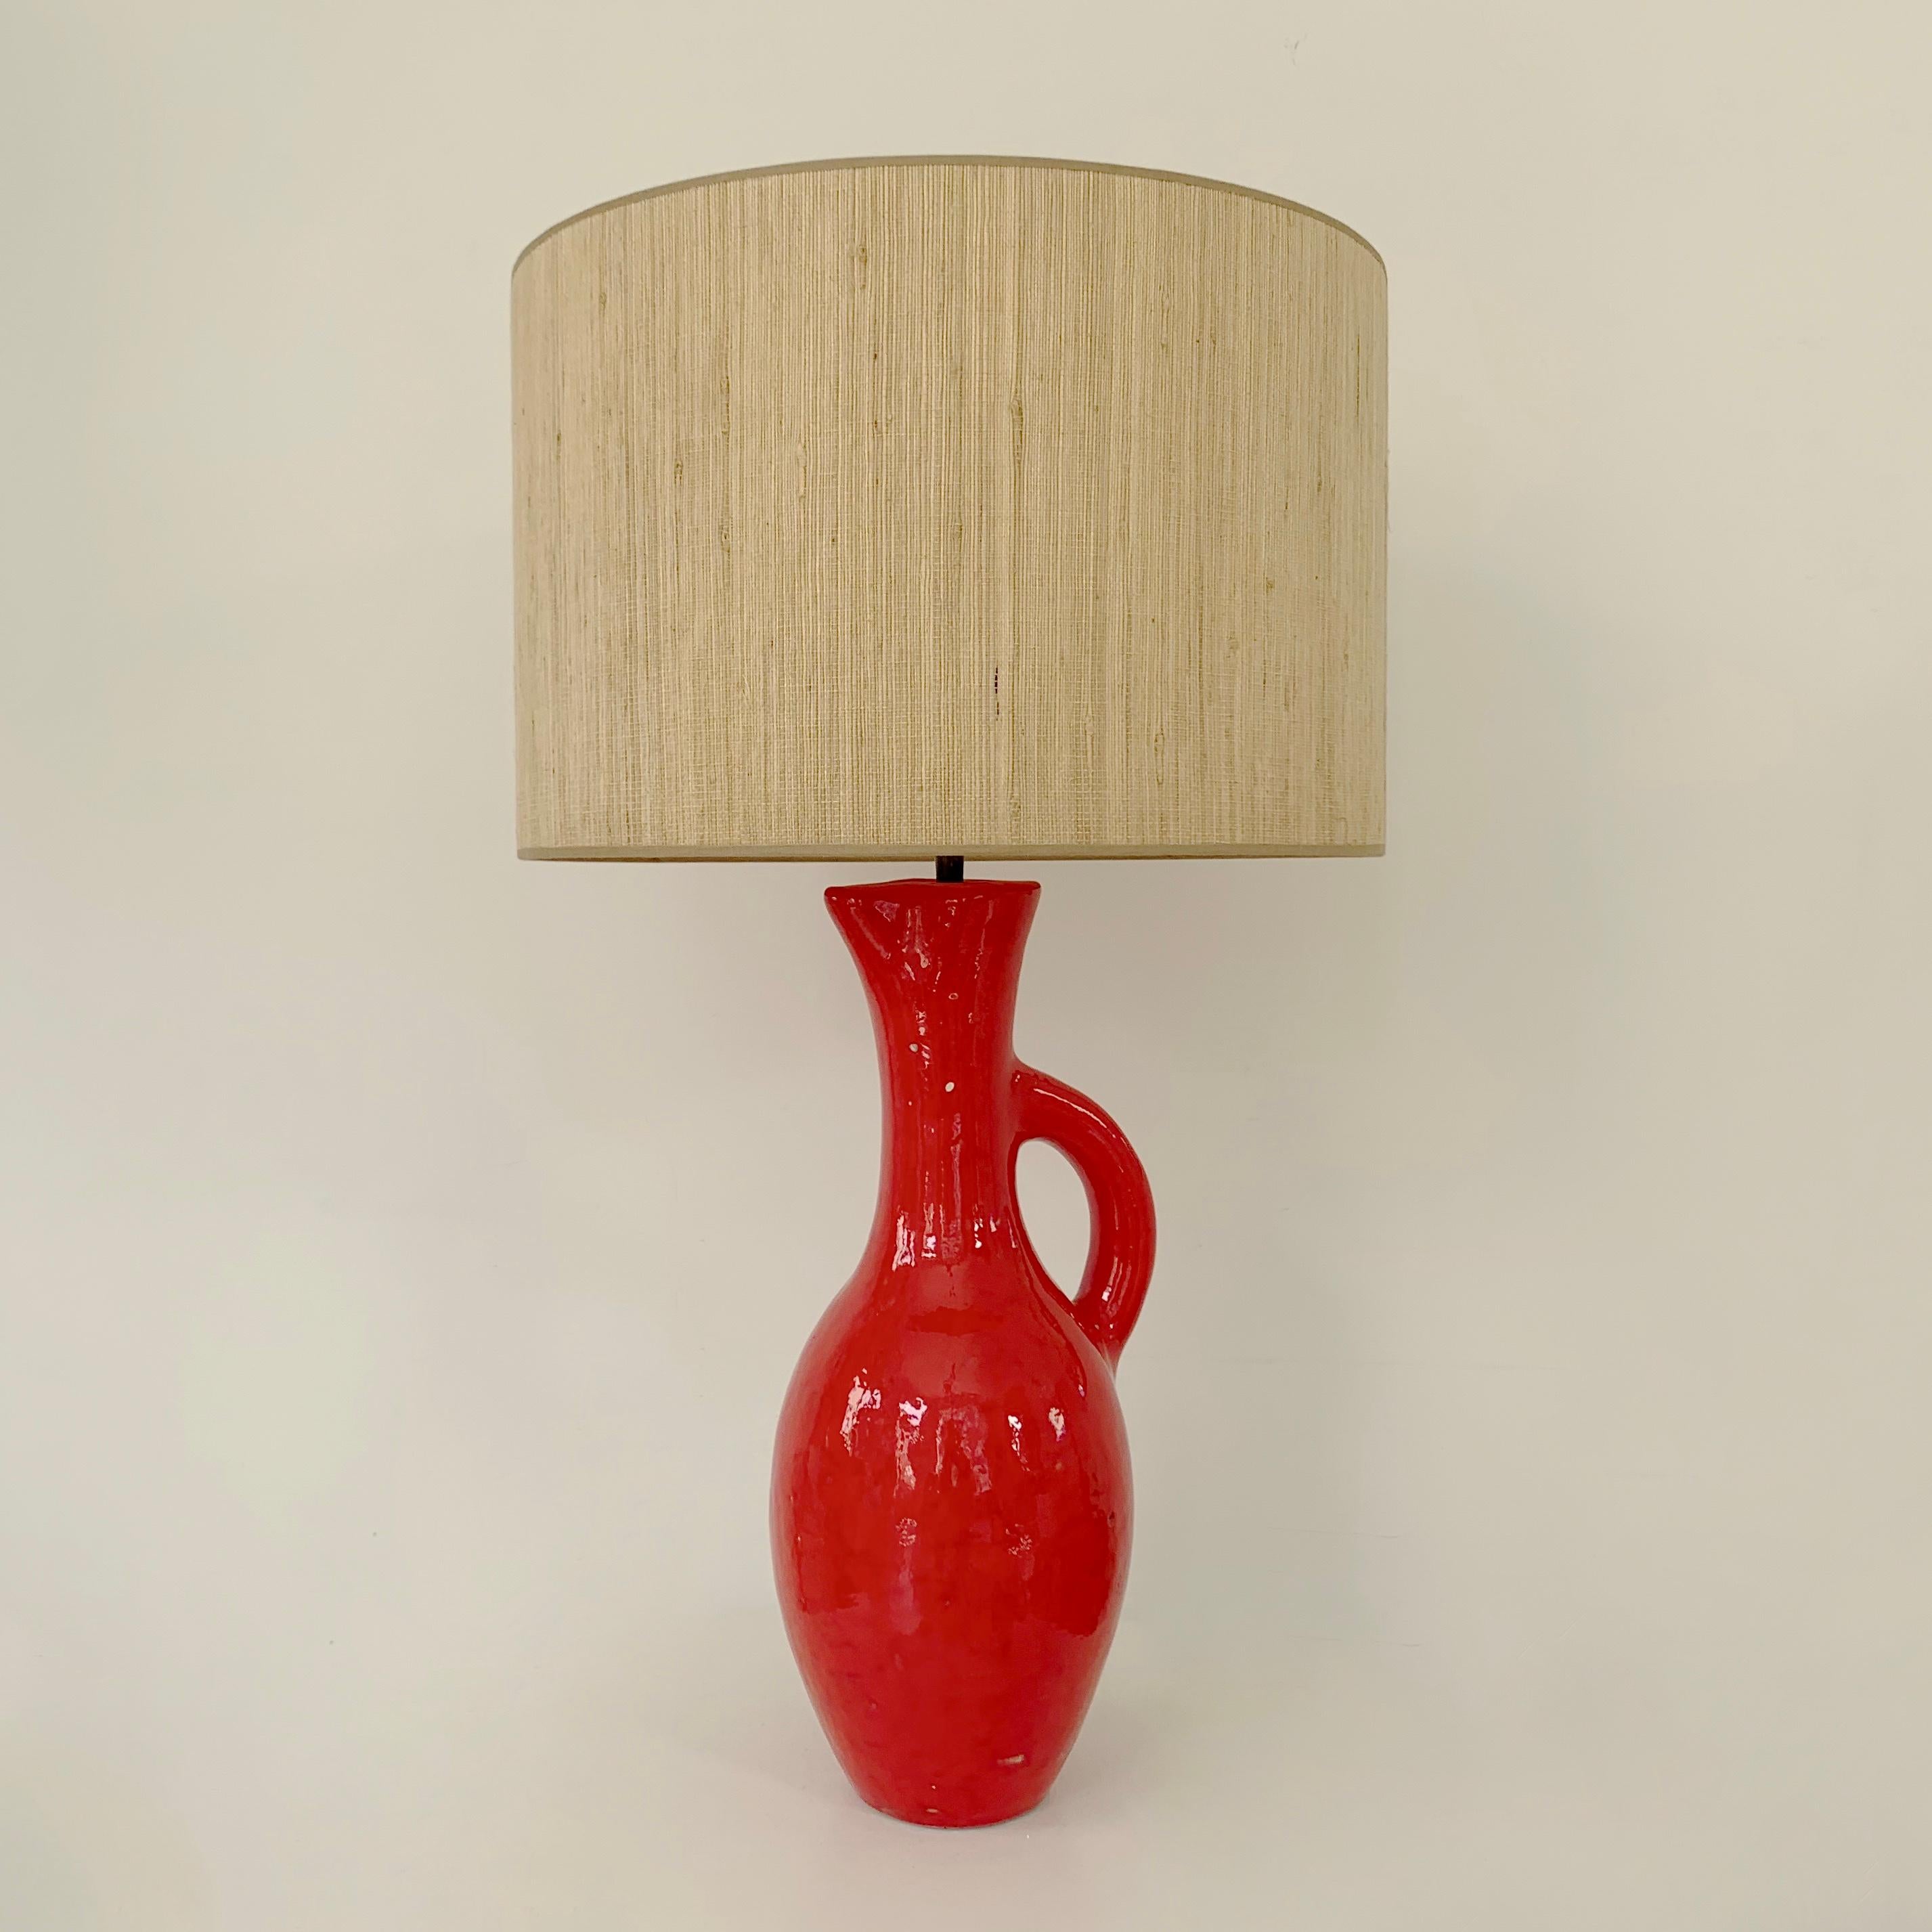 Les Archanges / Gilbert Valentin ceramic table lamp, circa 1950, Vallauris, France.
Large red enameled earthenware pitcher, new straw shade.
Incised underneath Gilbert Valentin Les Archanges Vallauris .
Dimensions: total height: 76 cm, height of the